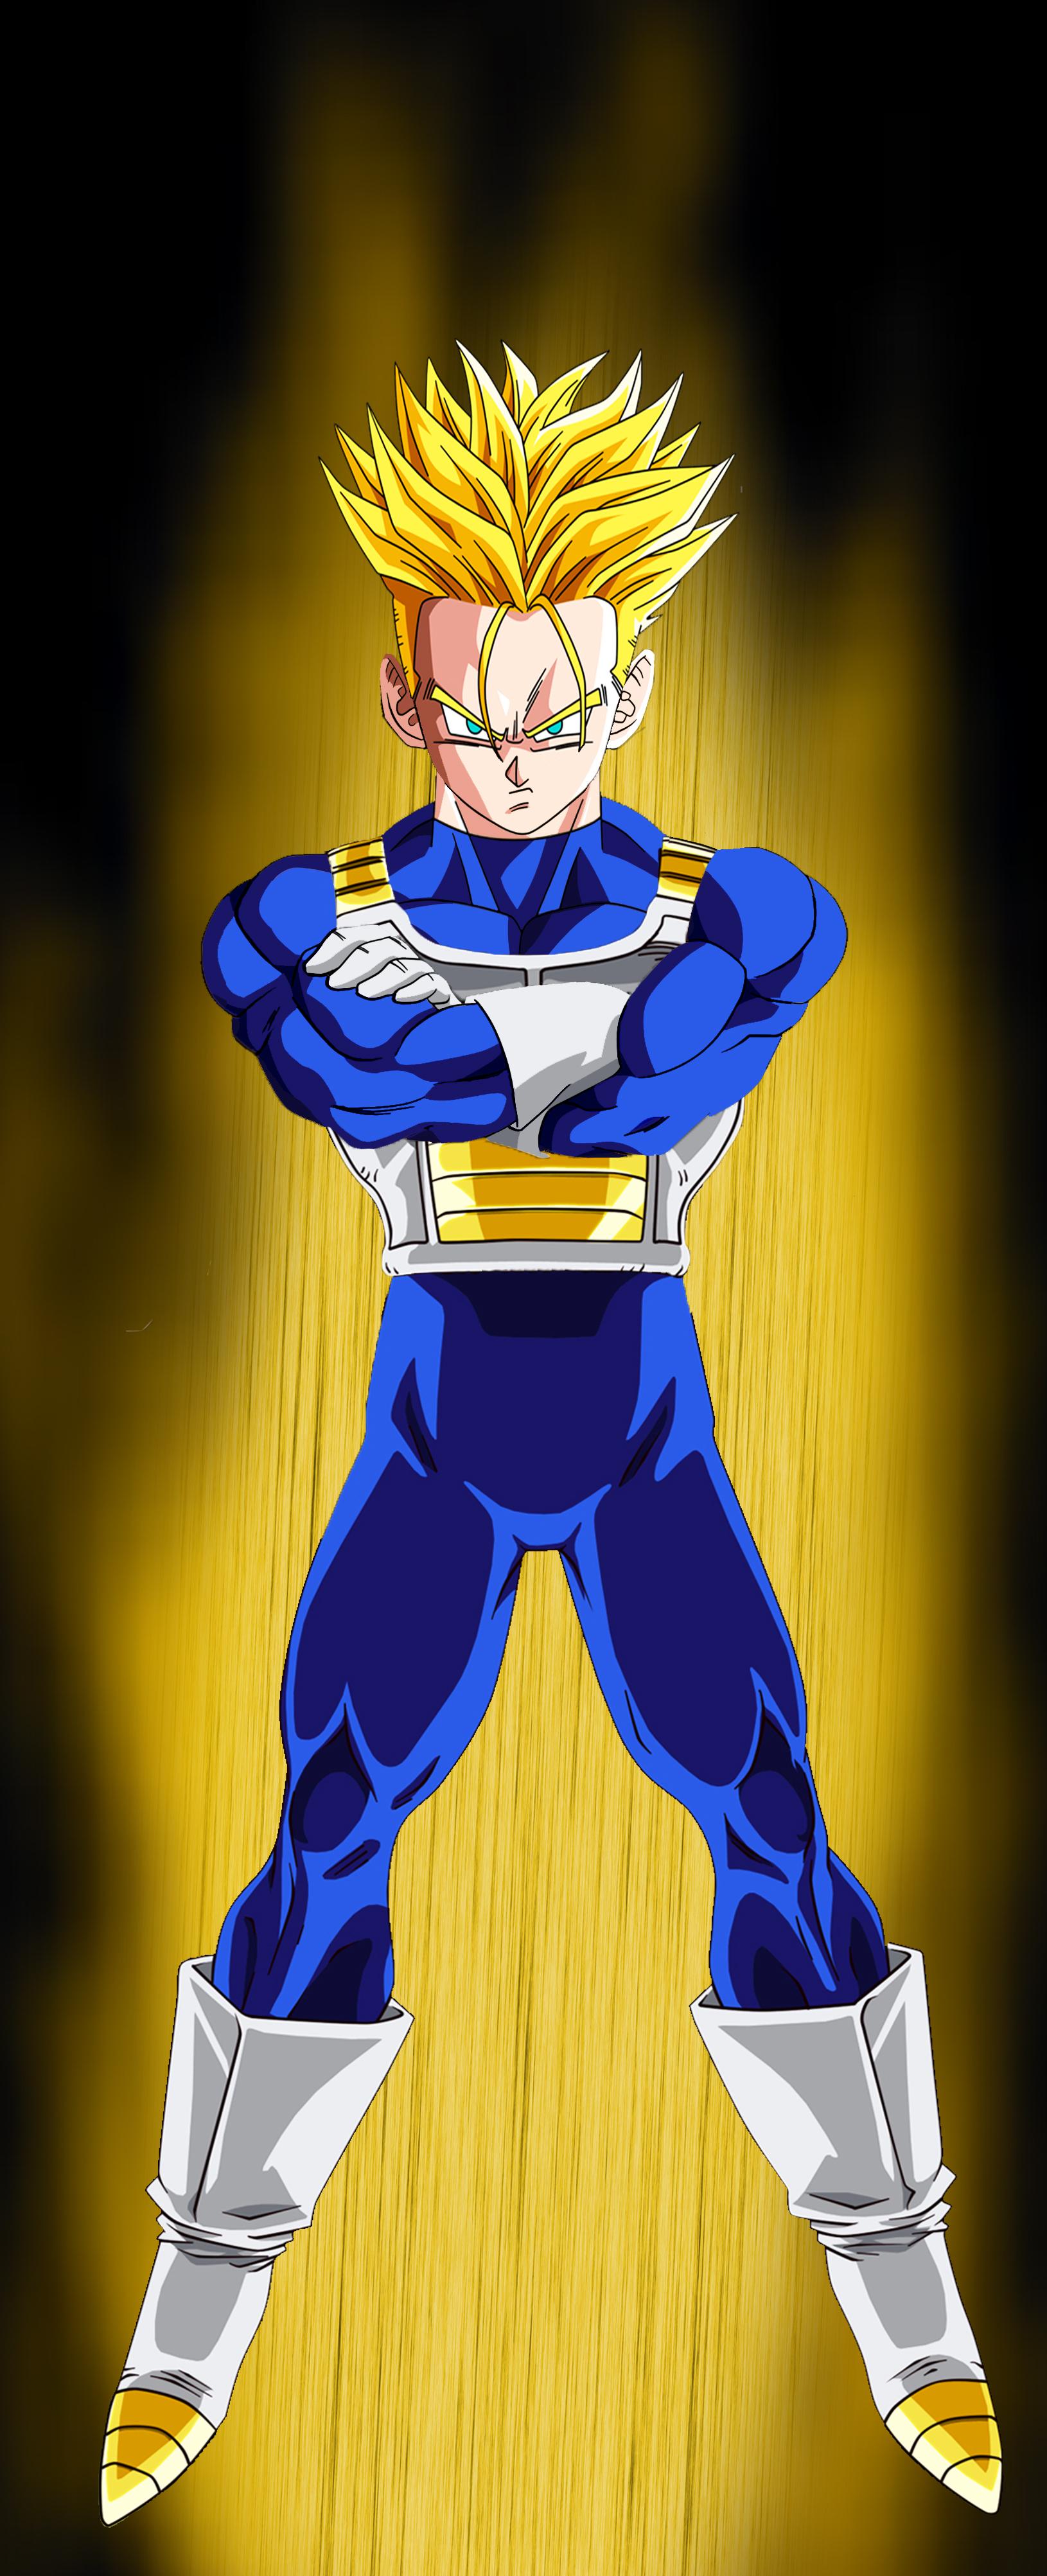 Free download Trunks Super Saiyan by Lucho1395 on [1630x4011] for